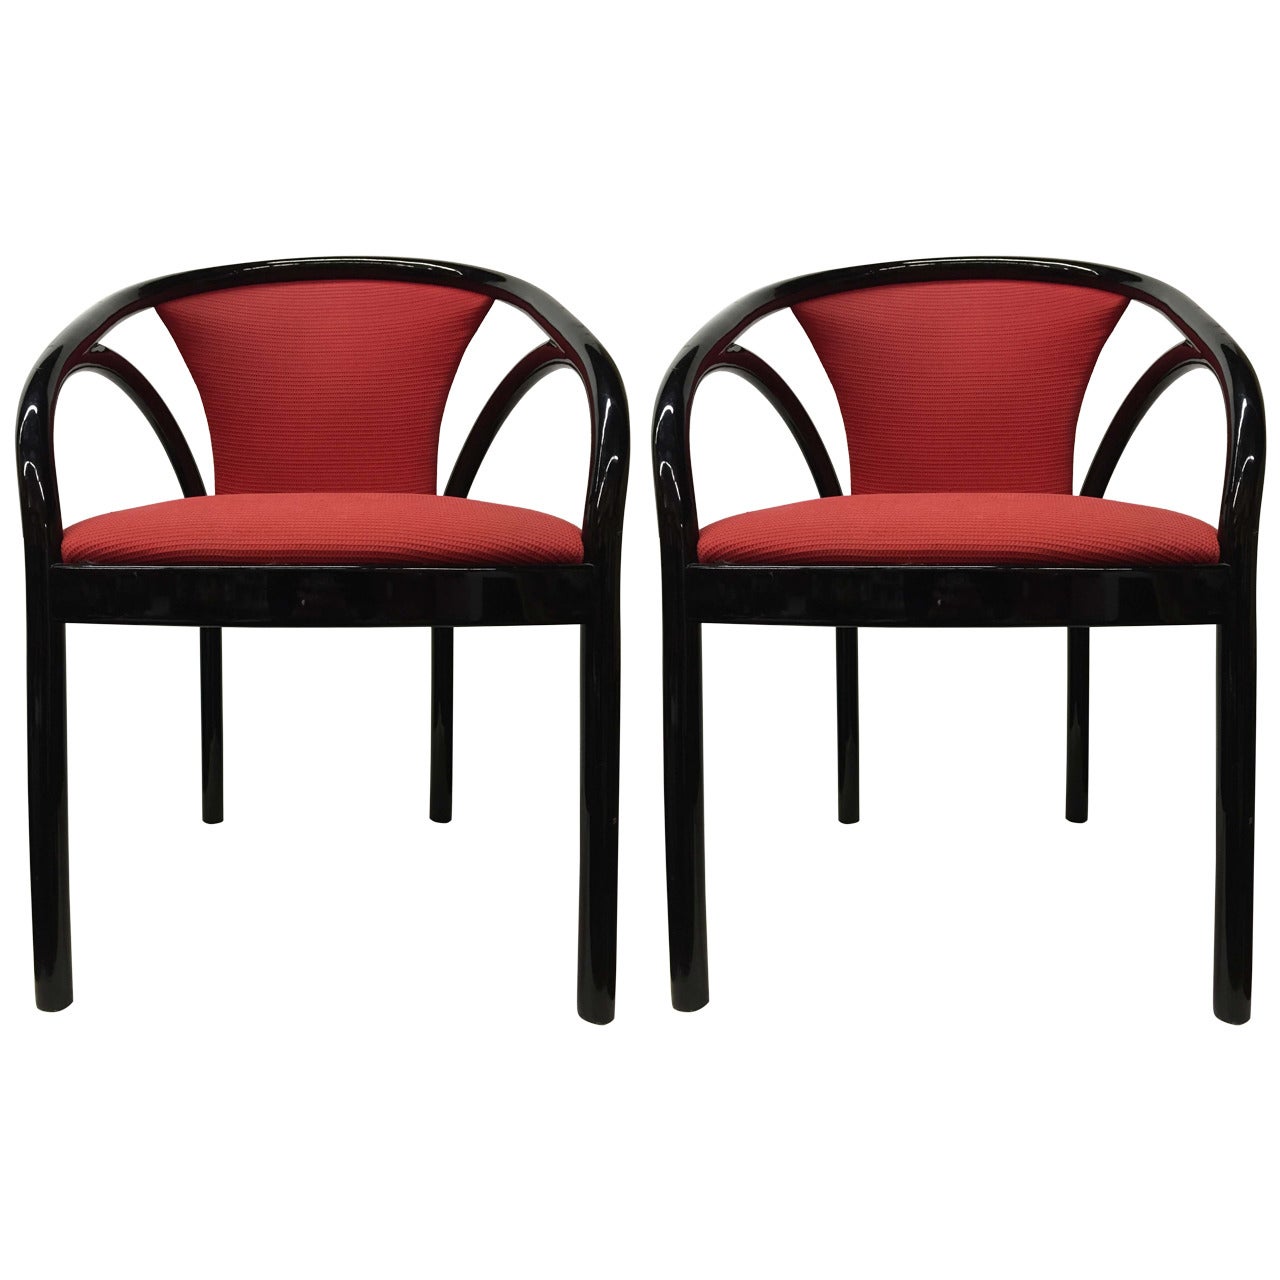 Pair of Black Lacquer Italian Chairs